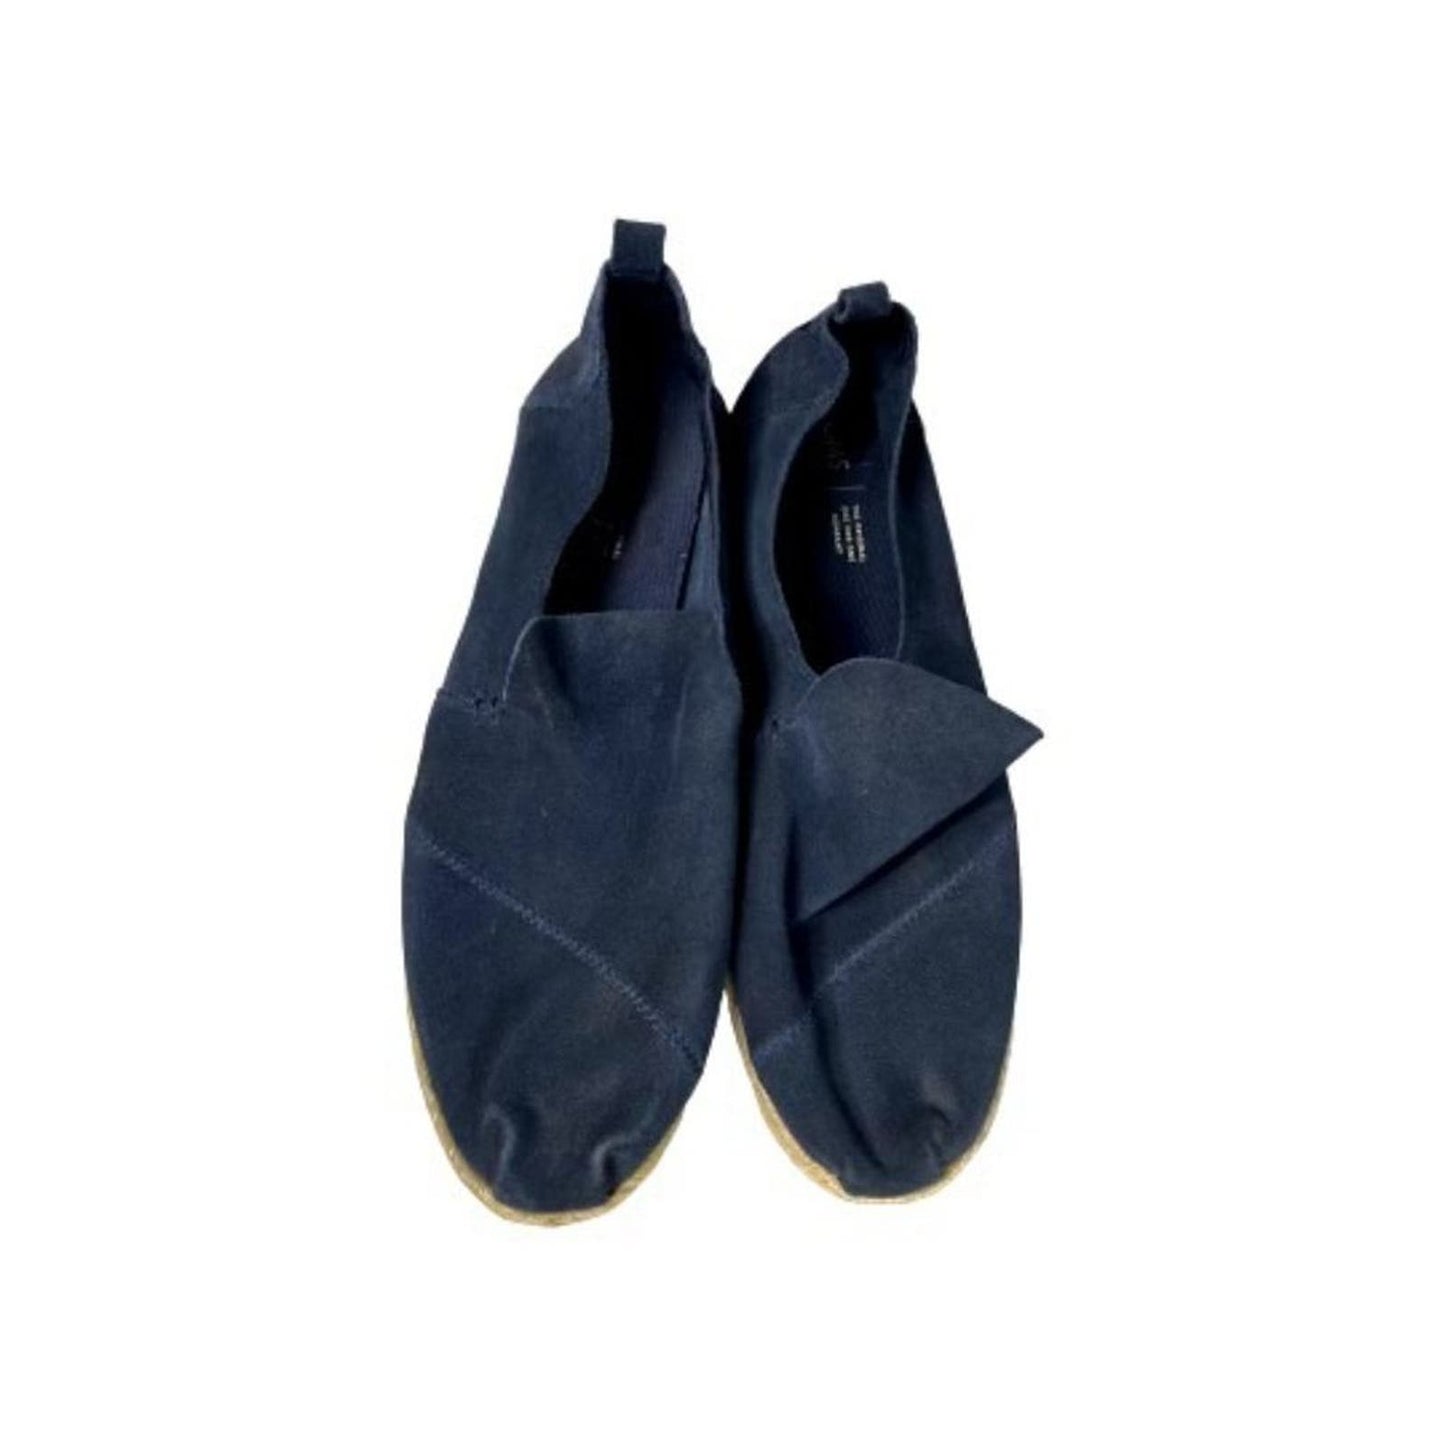 Toms Navy Suede Casual Shoes with Rope Accent